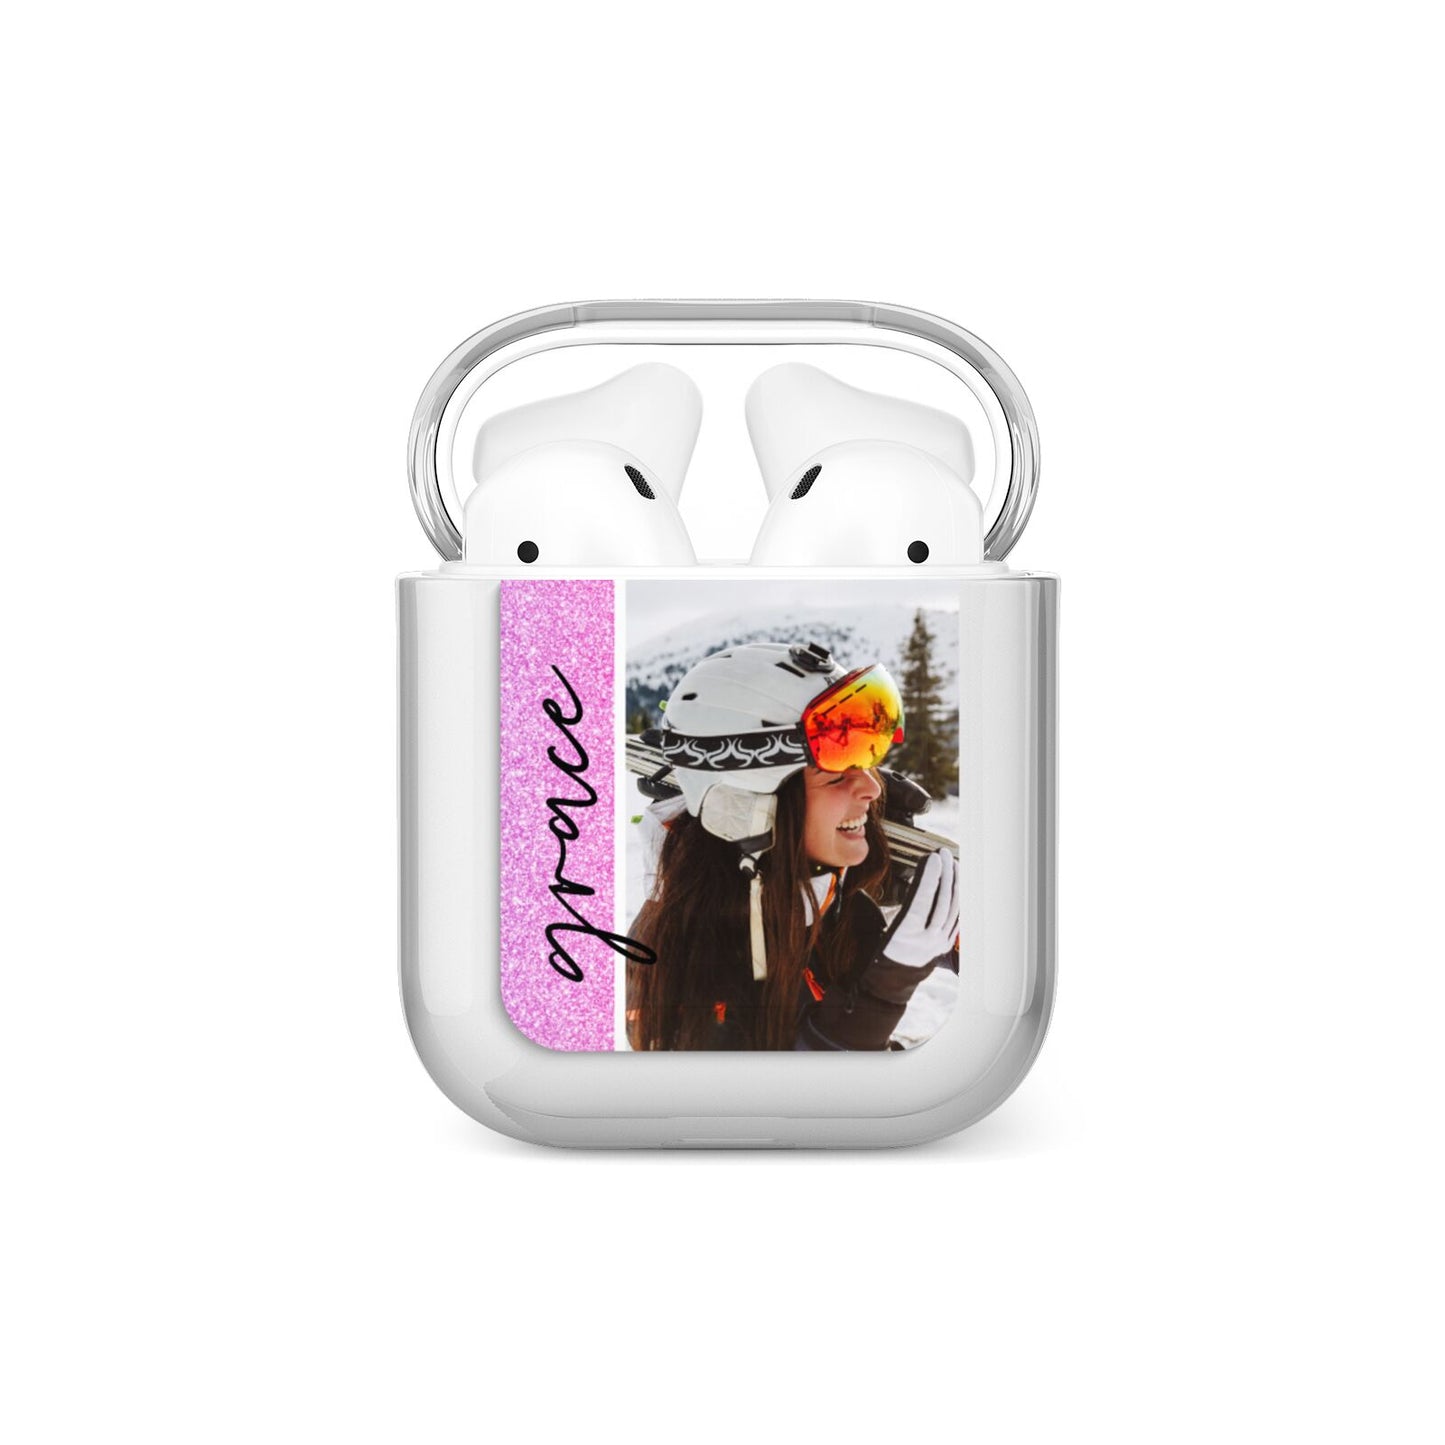 Glitter Personalised Photo Upload Name AirPods Case